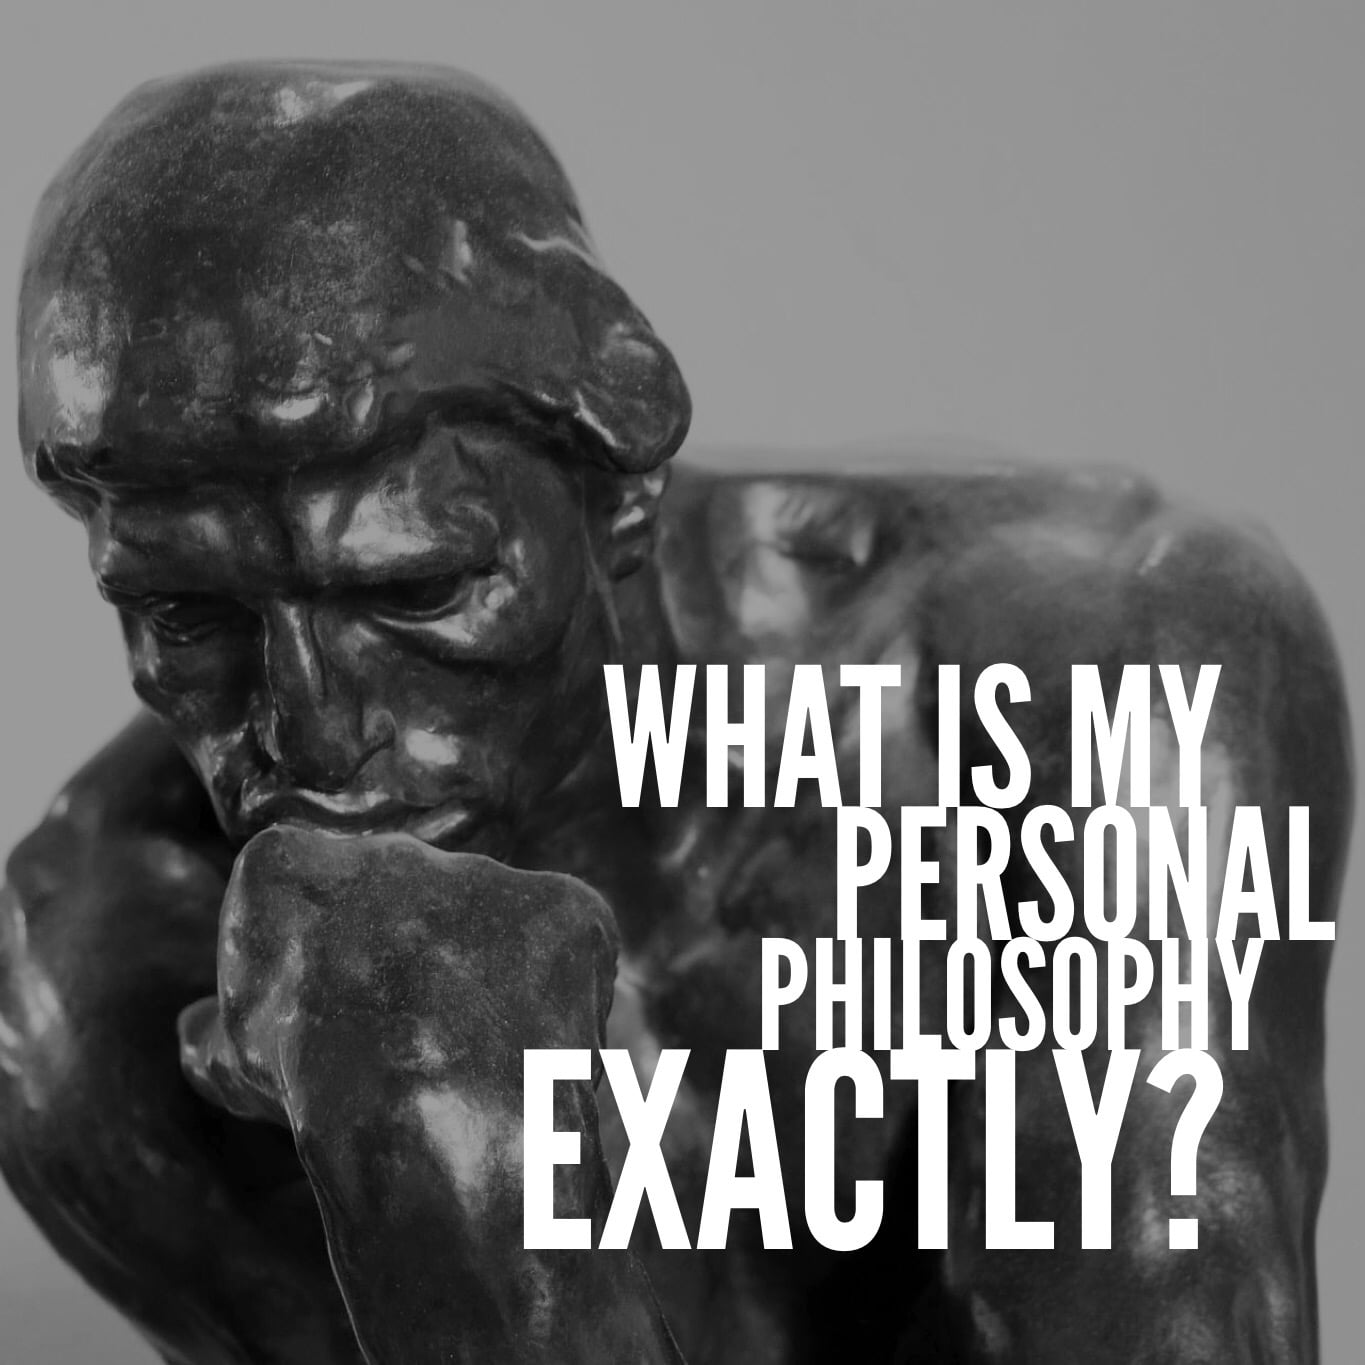 What is My Personal Philosophy Exactly?